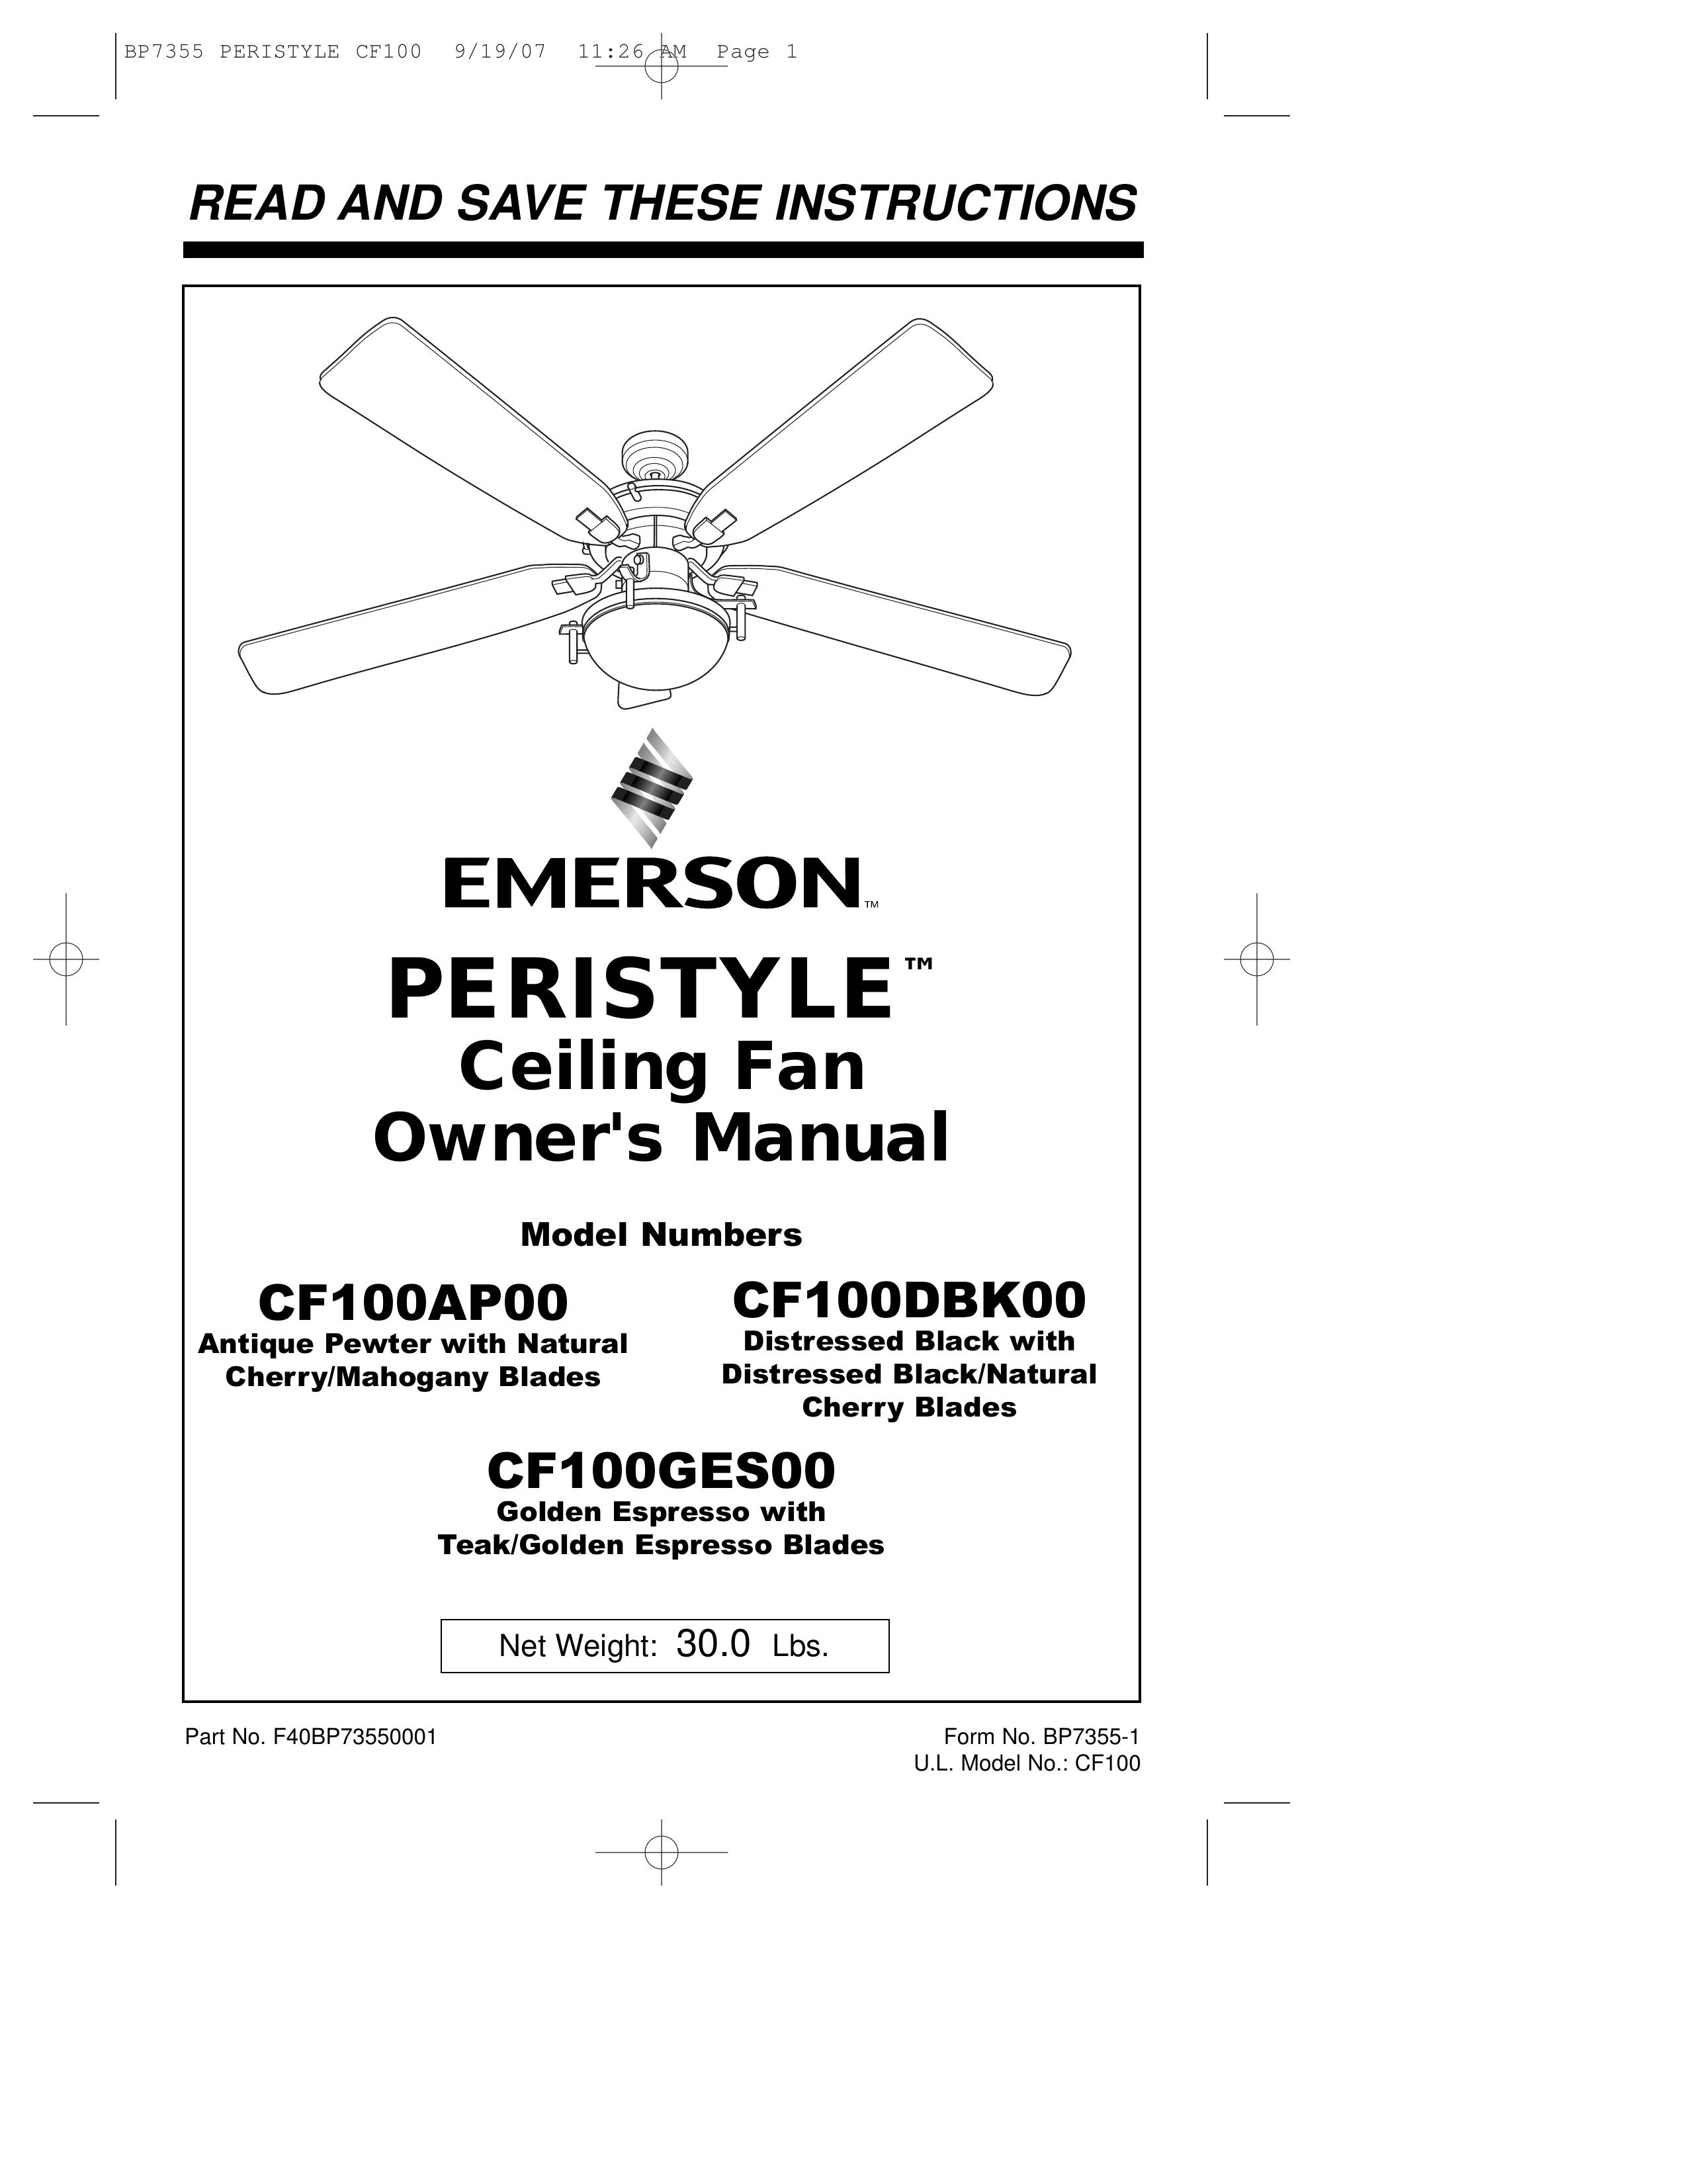 Emerson CF100GES00 Outdoor Ceiling Fan User Manual